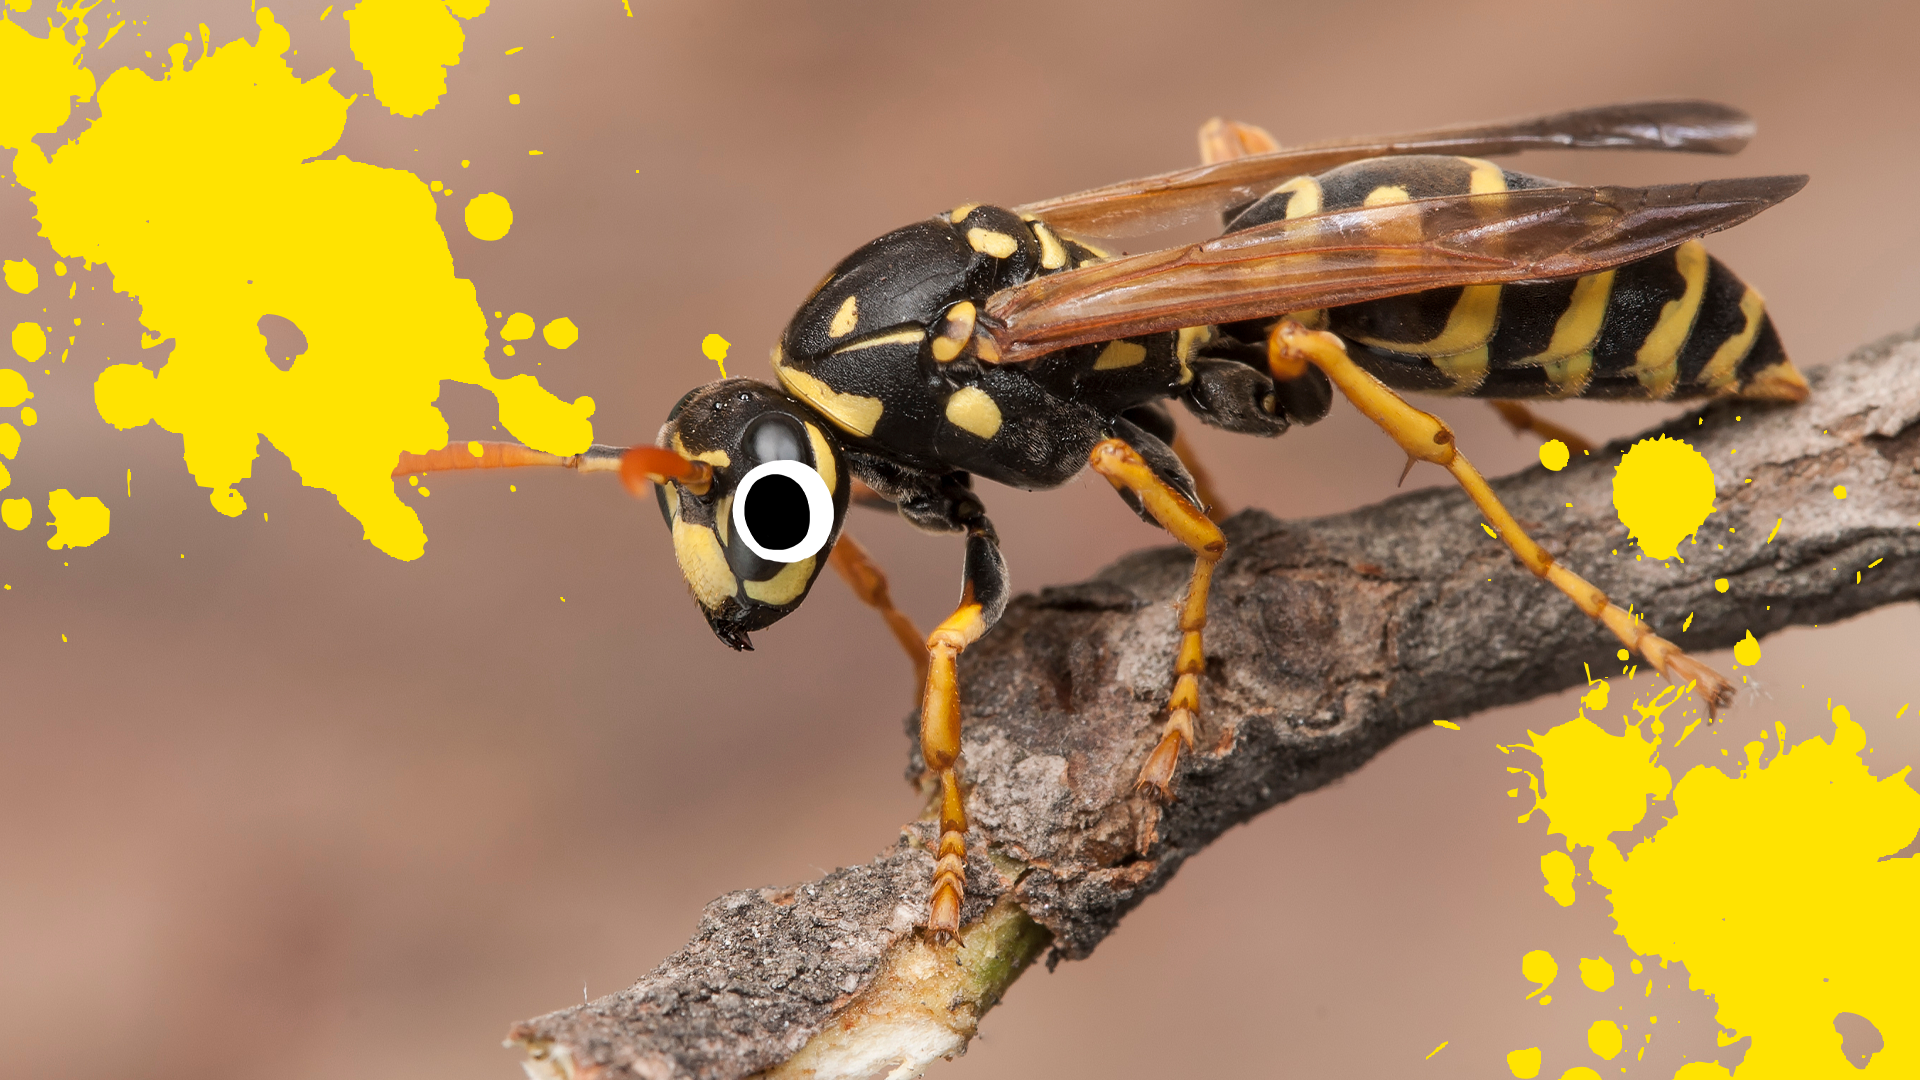 A wasp with yellow splats